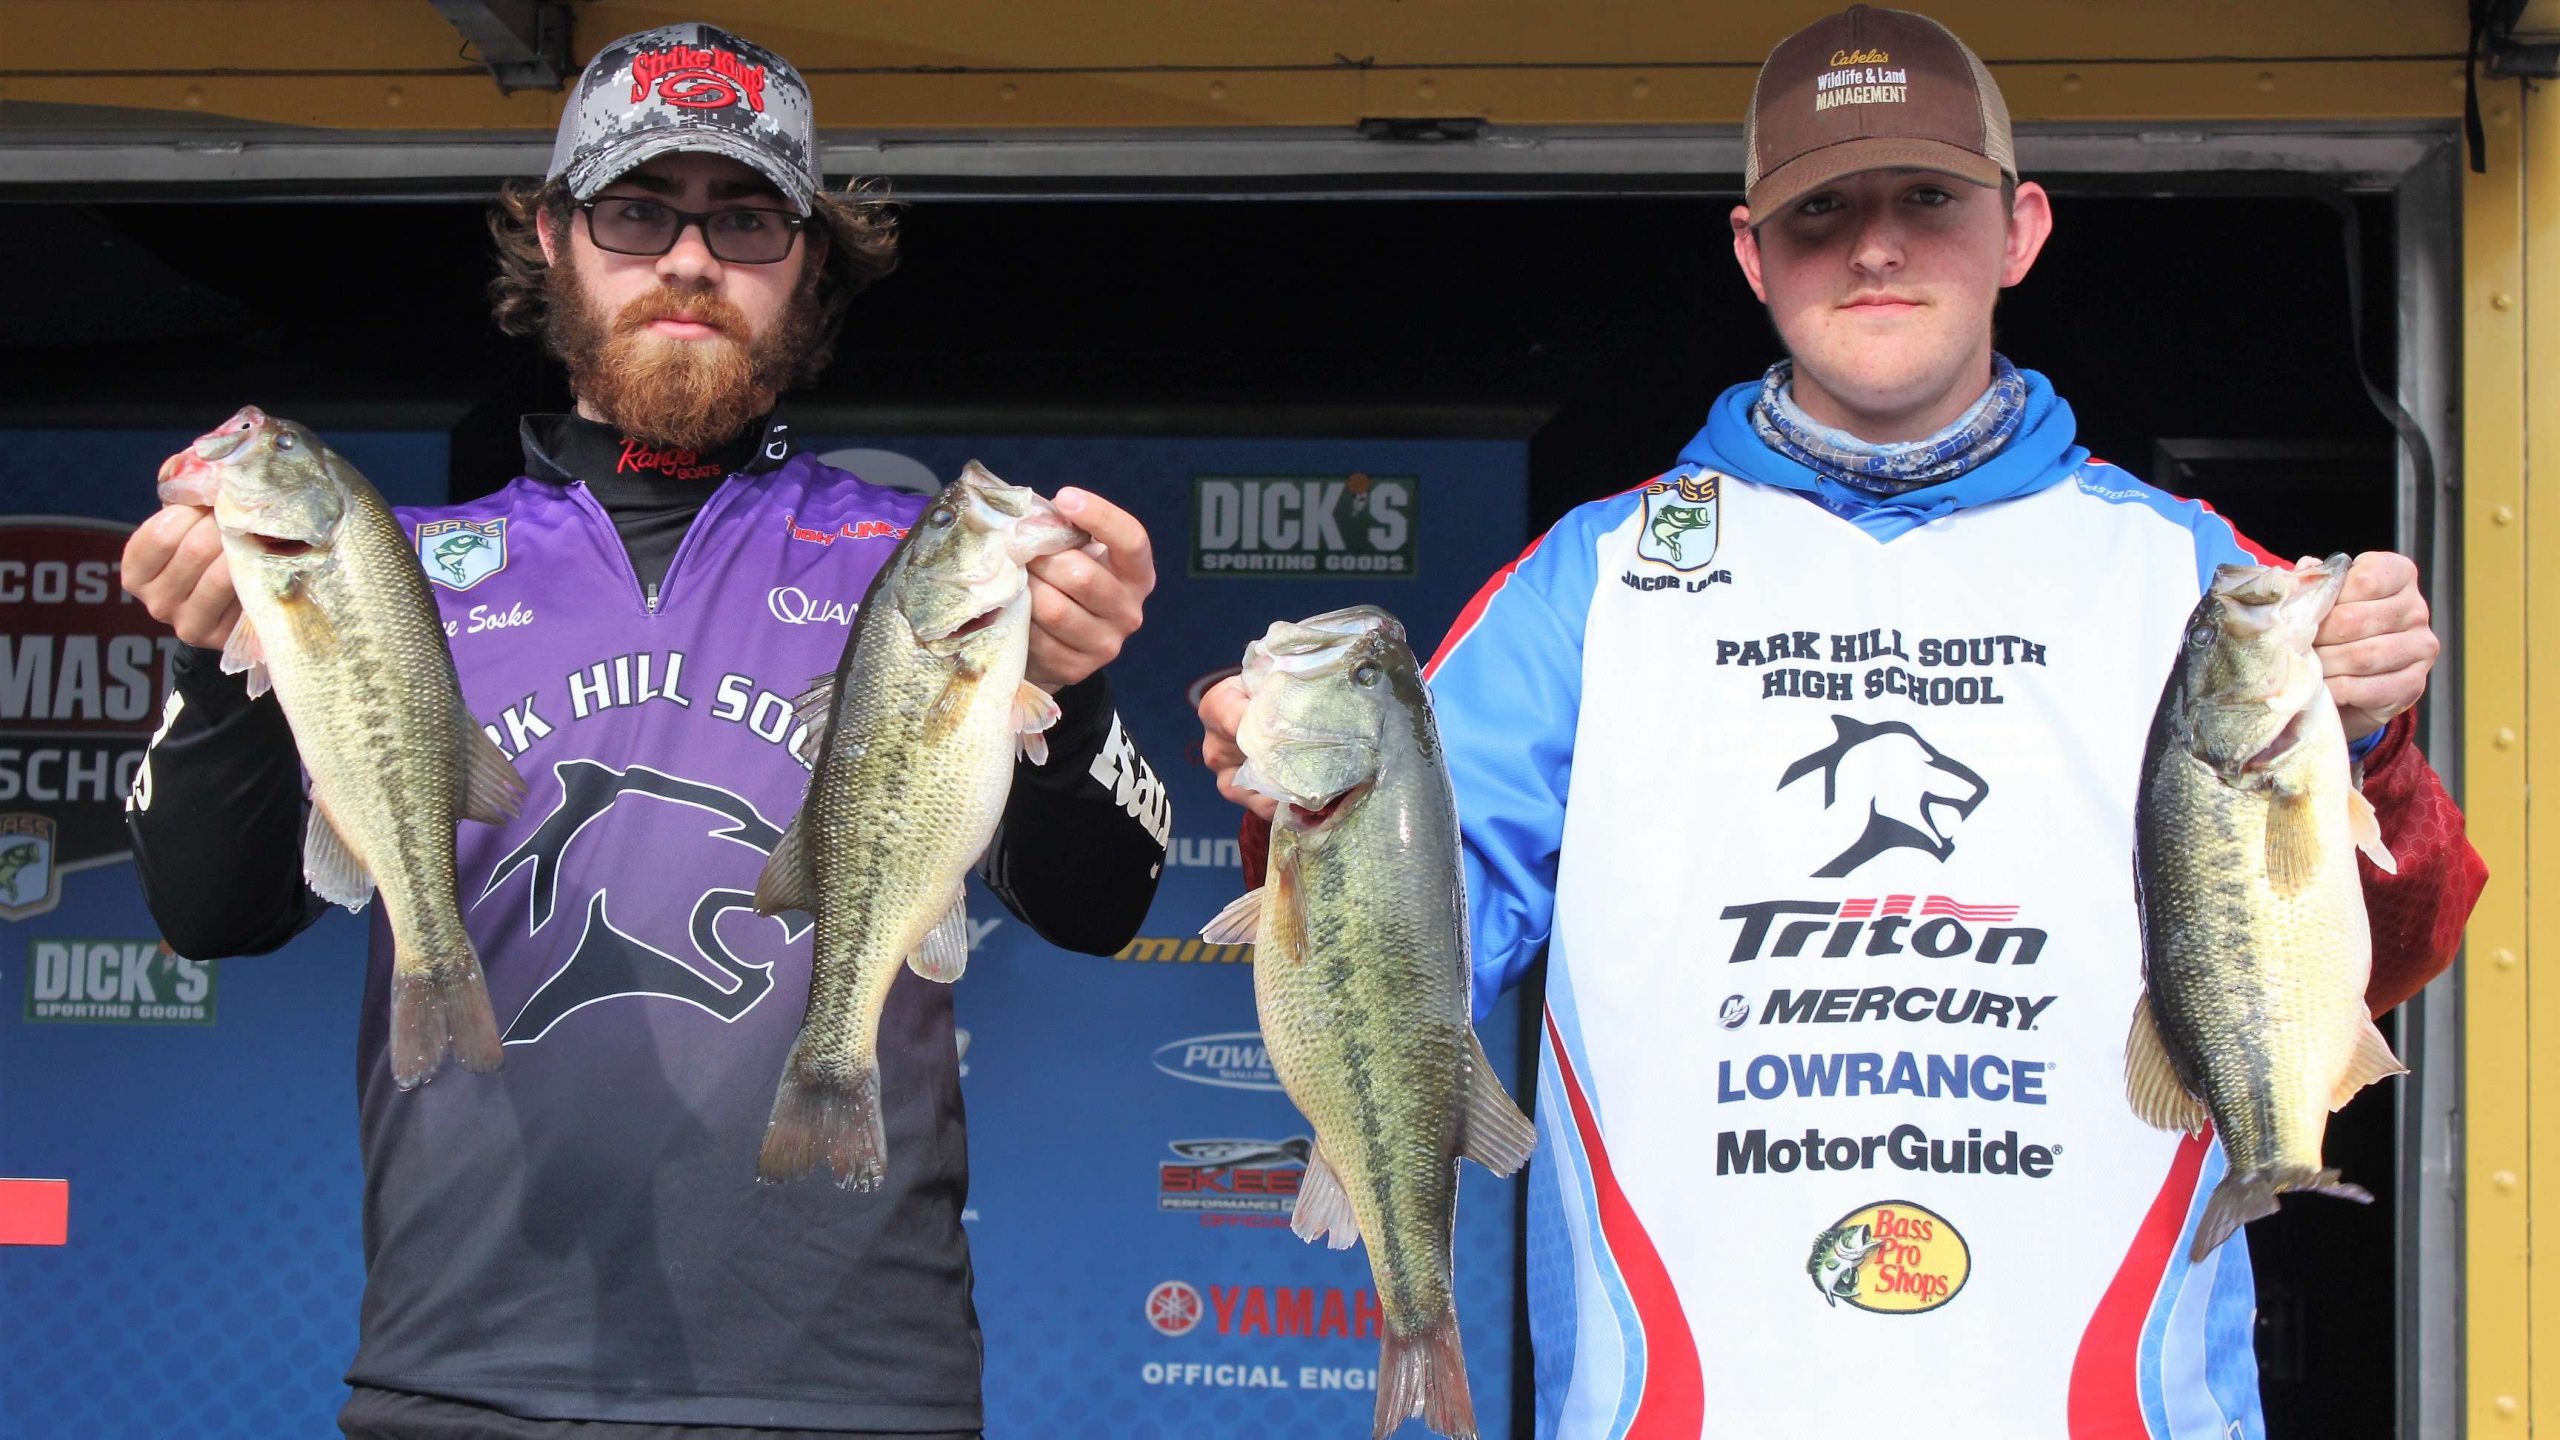 And here are some beauties from the Park Hill South (Mo.) Elite Anglers team of Bryce Soske and Jacob Lang. They finished 10th with 12-2.
